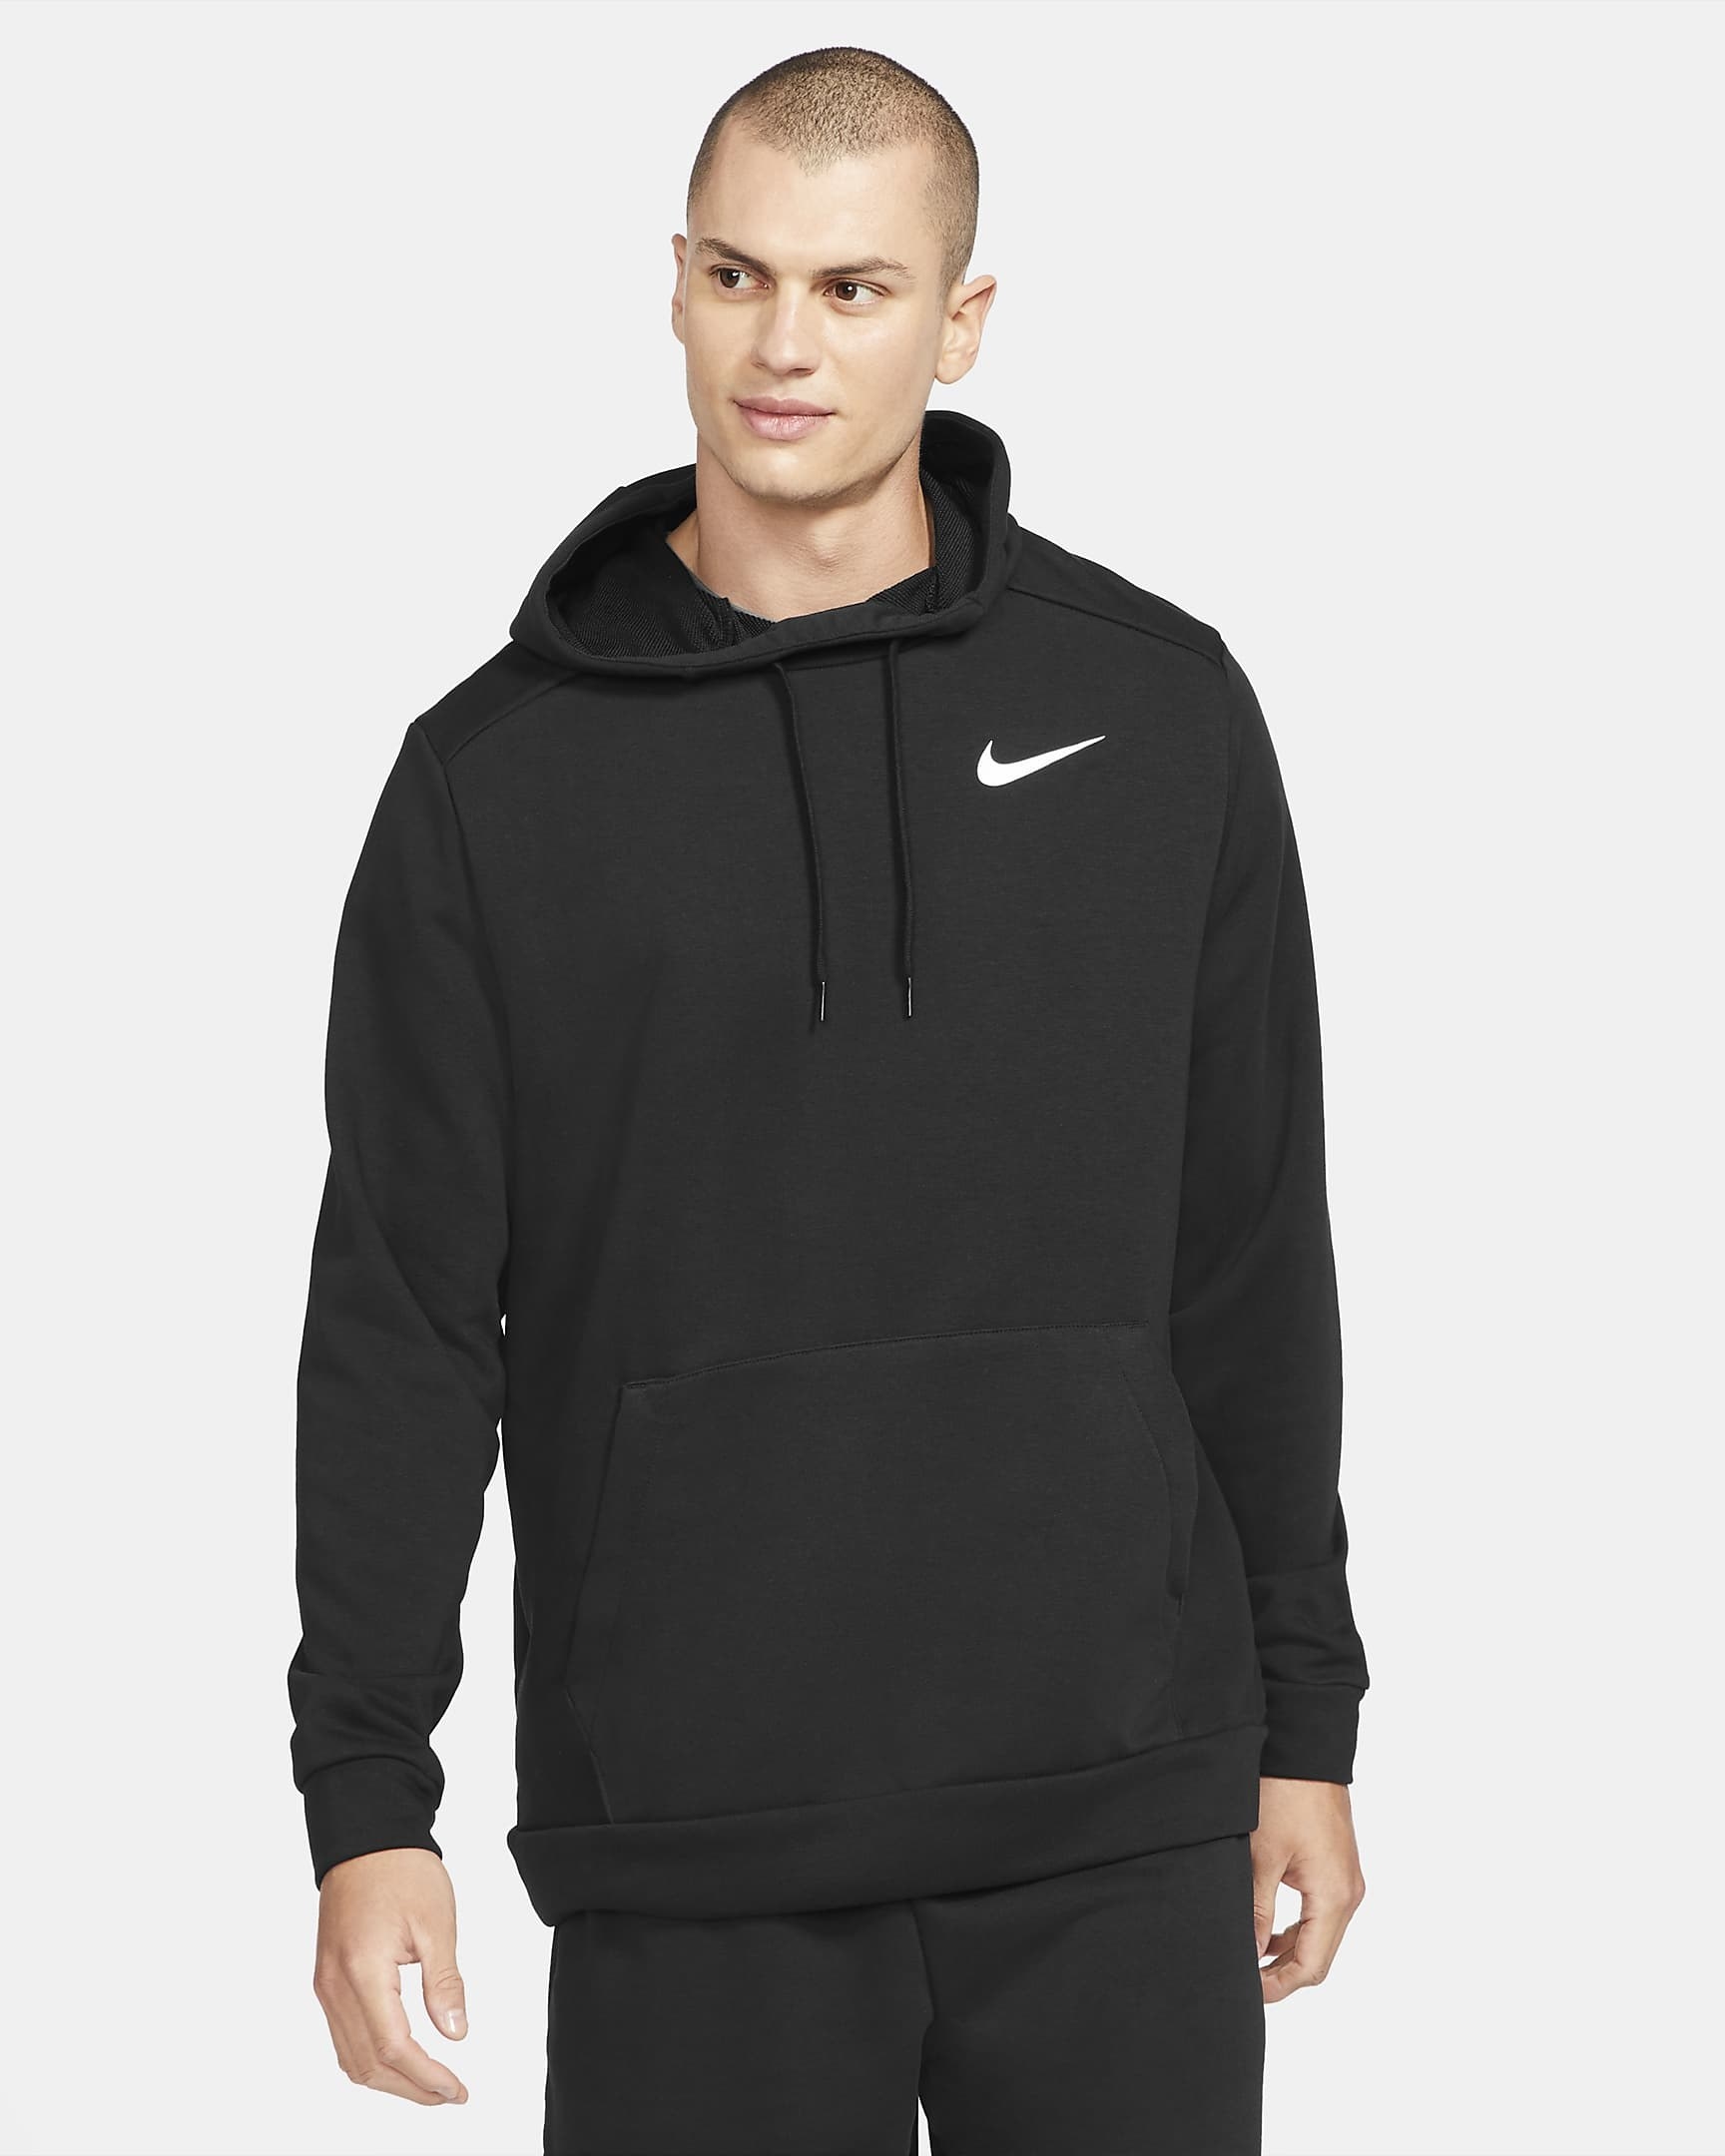 Nike Is Offering An Extra 20% Off Select Styles